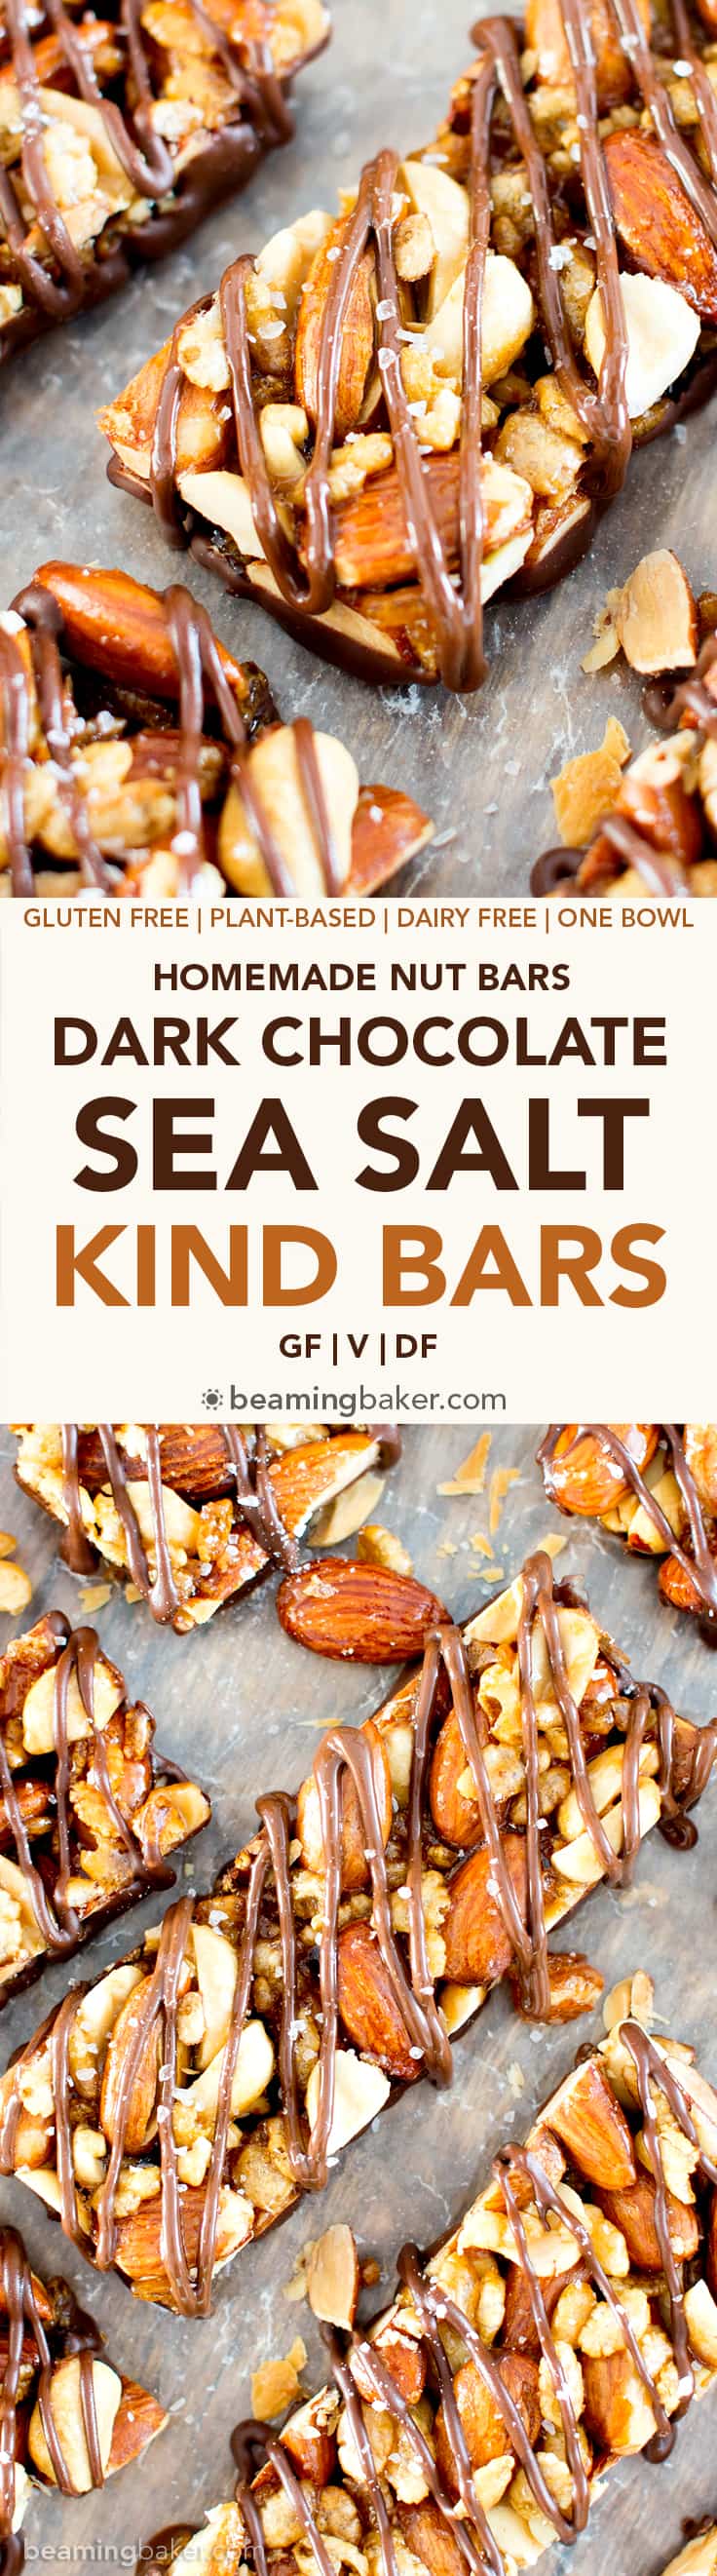 Homemade Dark Chocolate Sea Salt KIND Nut Bars (V, GF, DF): a protein-rich recipe for homemade KIND bars drizzled in dark chocolate and sprinkled with sea salt. #Vegan #GlutenFree #DairyFree #ProteinPacked | BeamingBaker.com